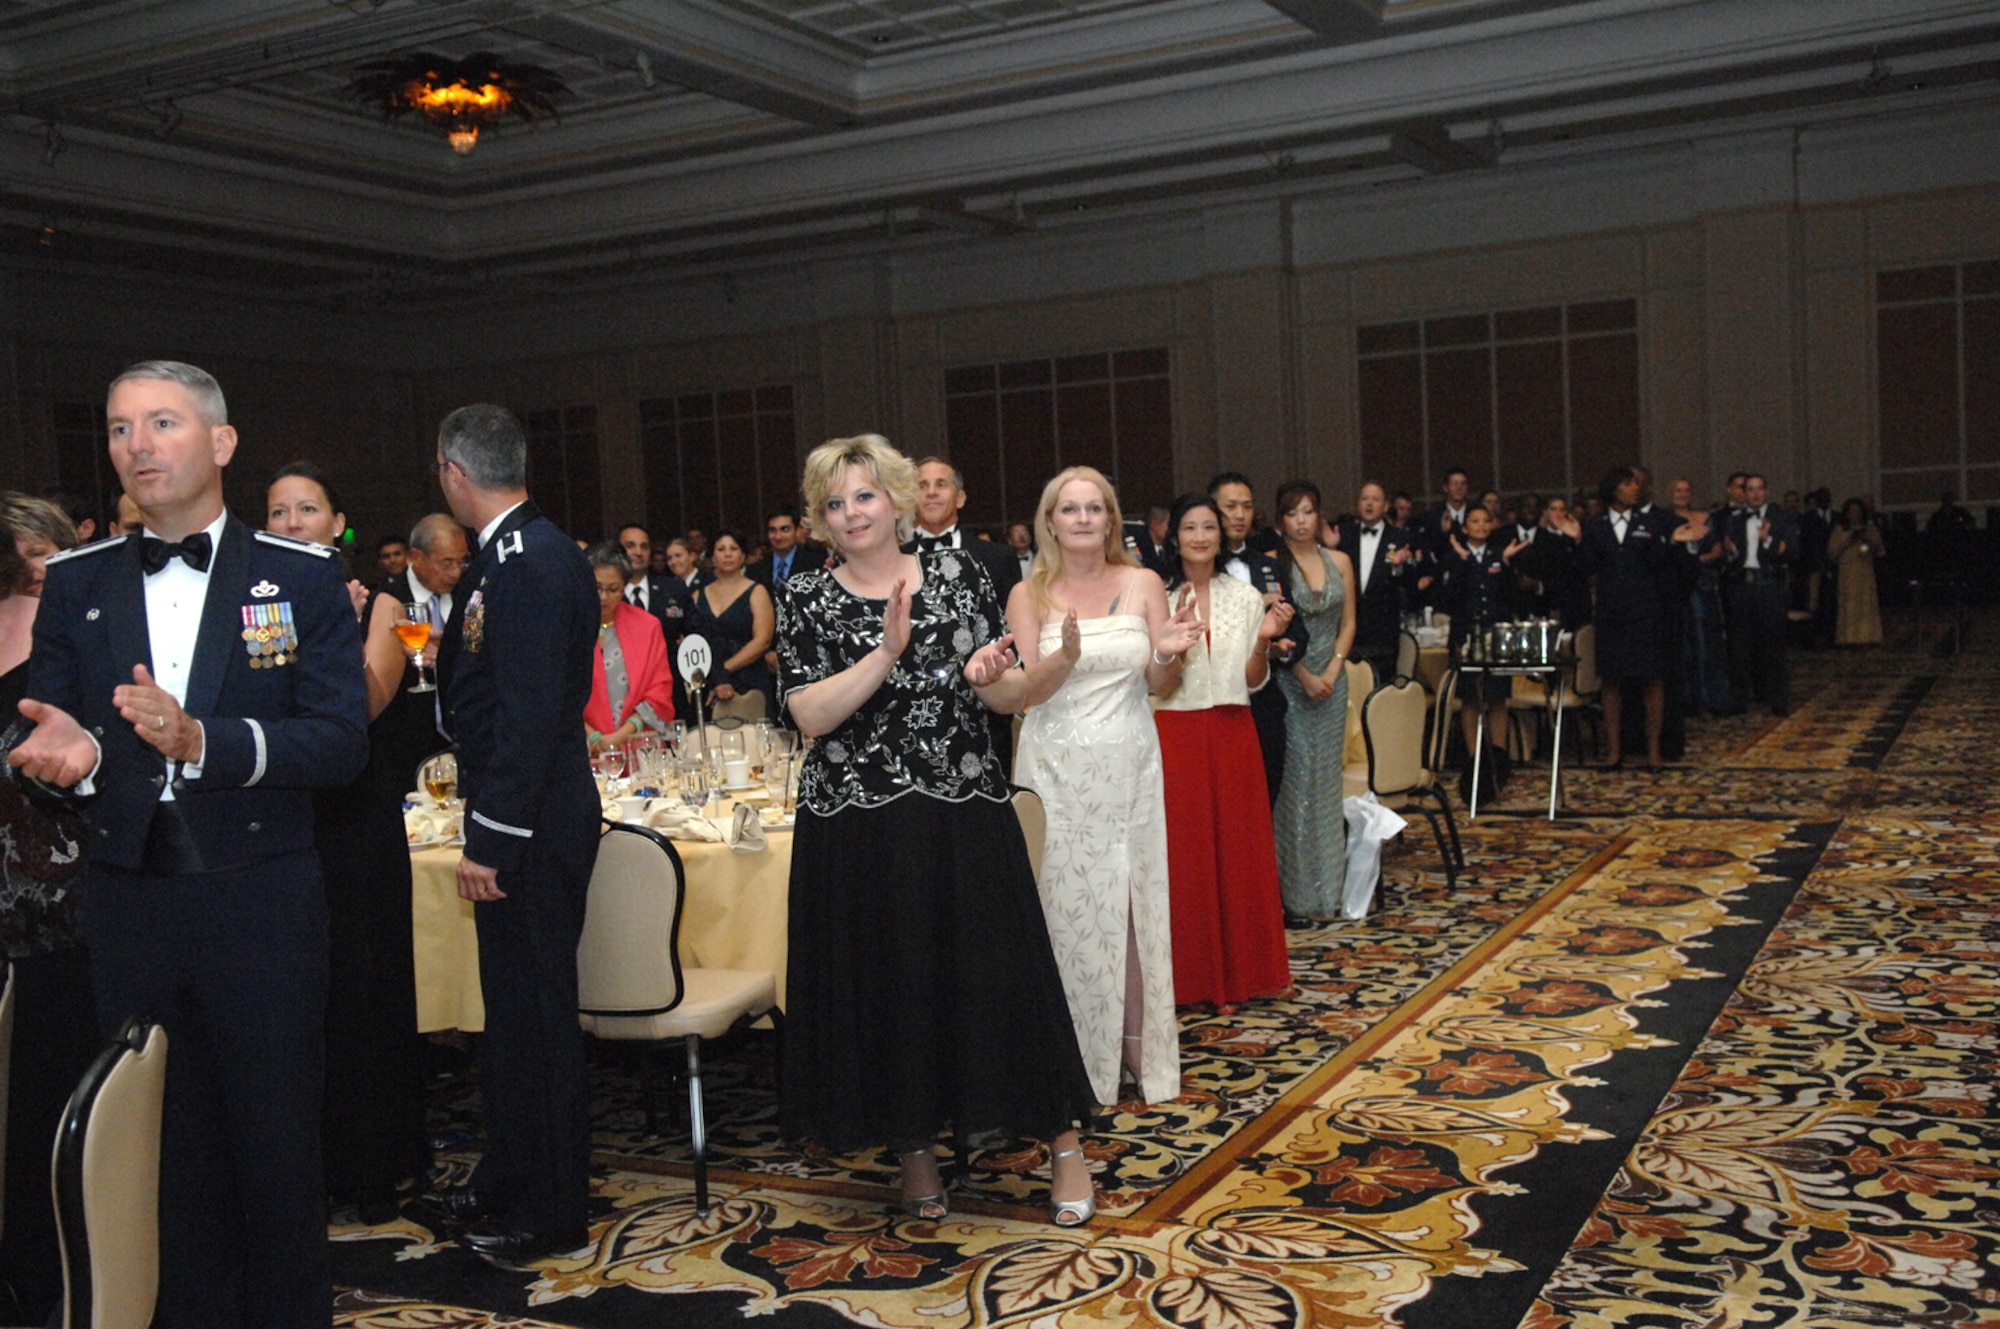 Attendees of the 60th Anniversary Air Force Ball clap during the singing of the Air Force song September 8, 2007 at the Mirage Hotel and Casino Las Vegas, NV.  More than 1,400 Airmen and guests attended the Ball, which held the theme "Heritage to Horizons.
(U.S. Air Force photo by Senior Airman Larry E. Reid Jr.)